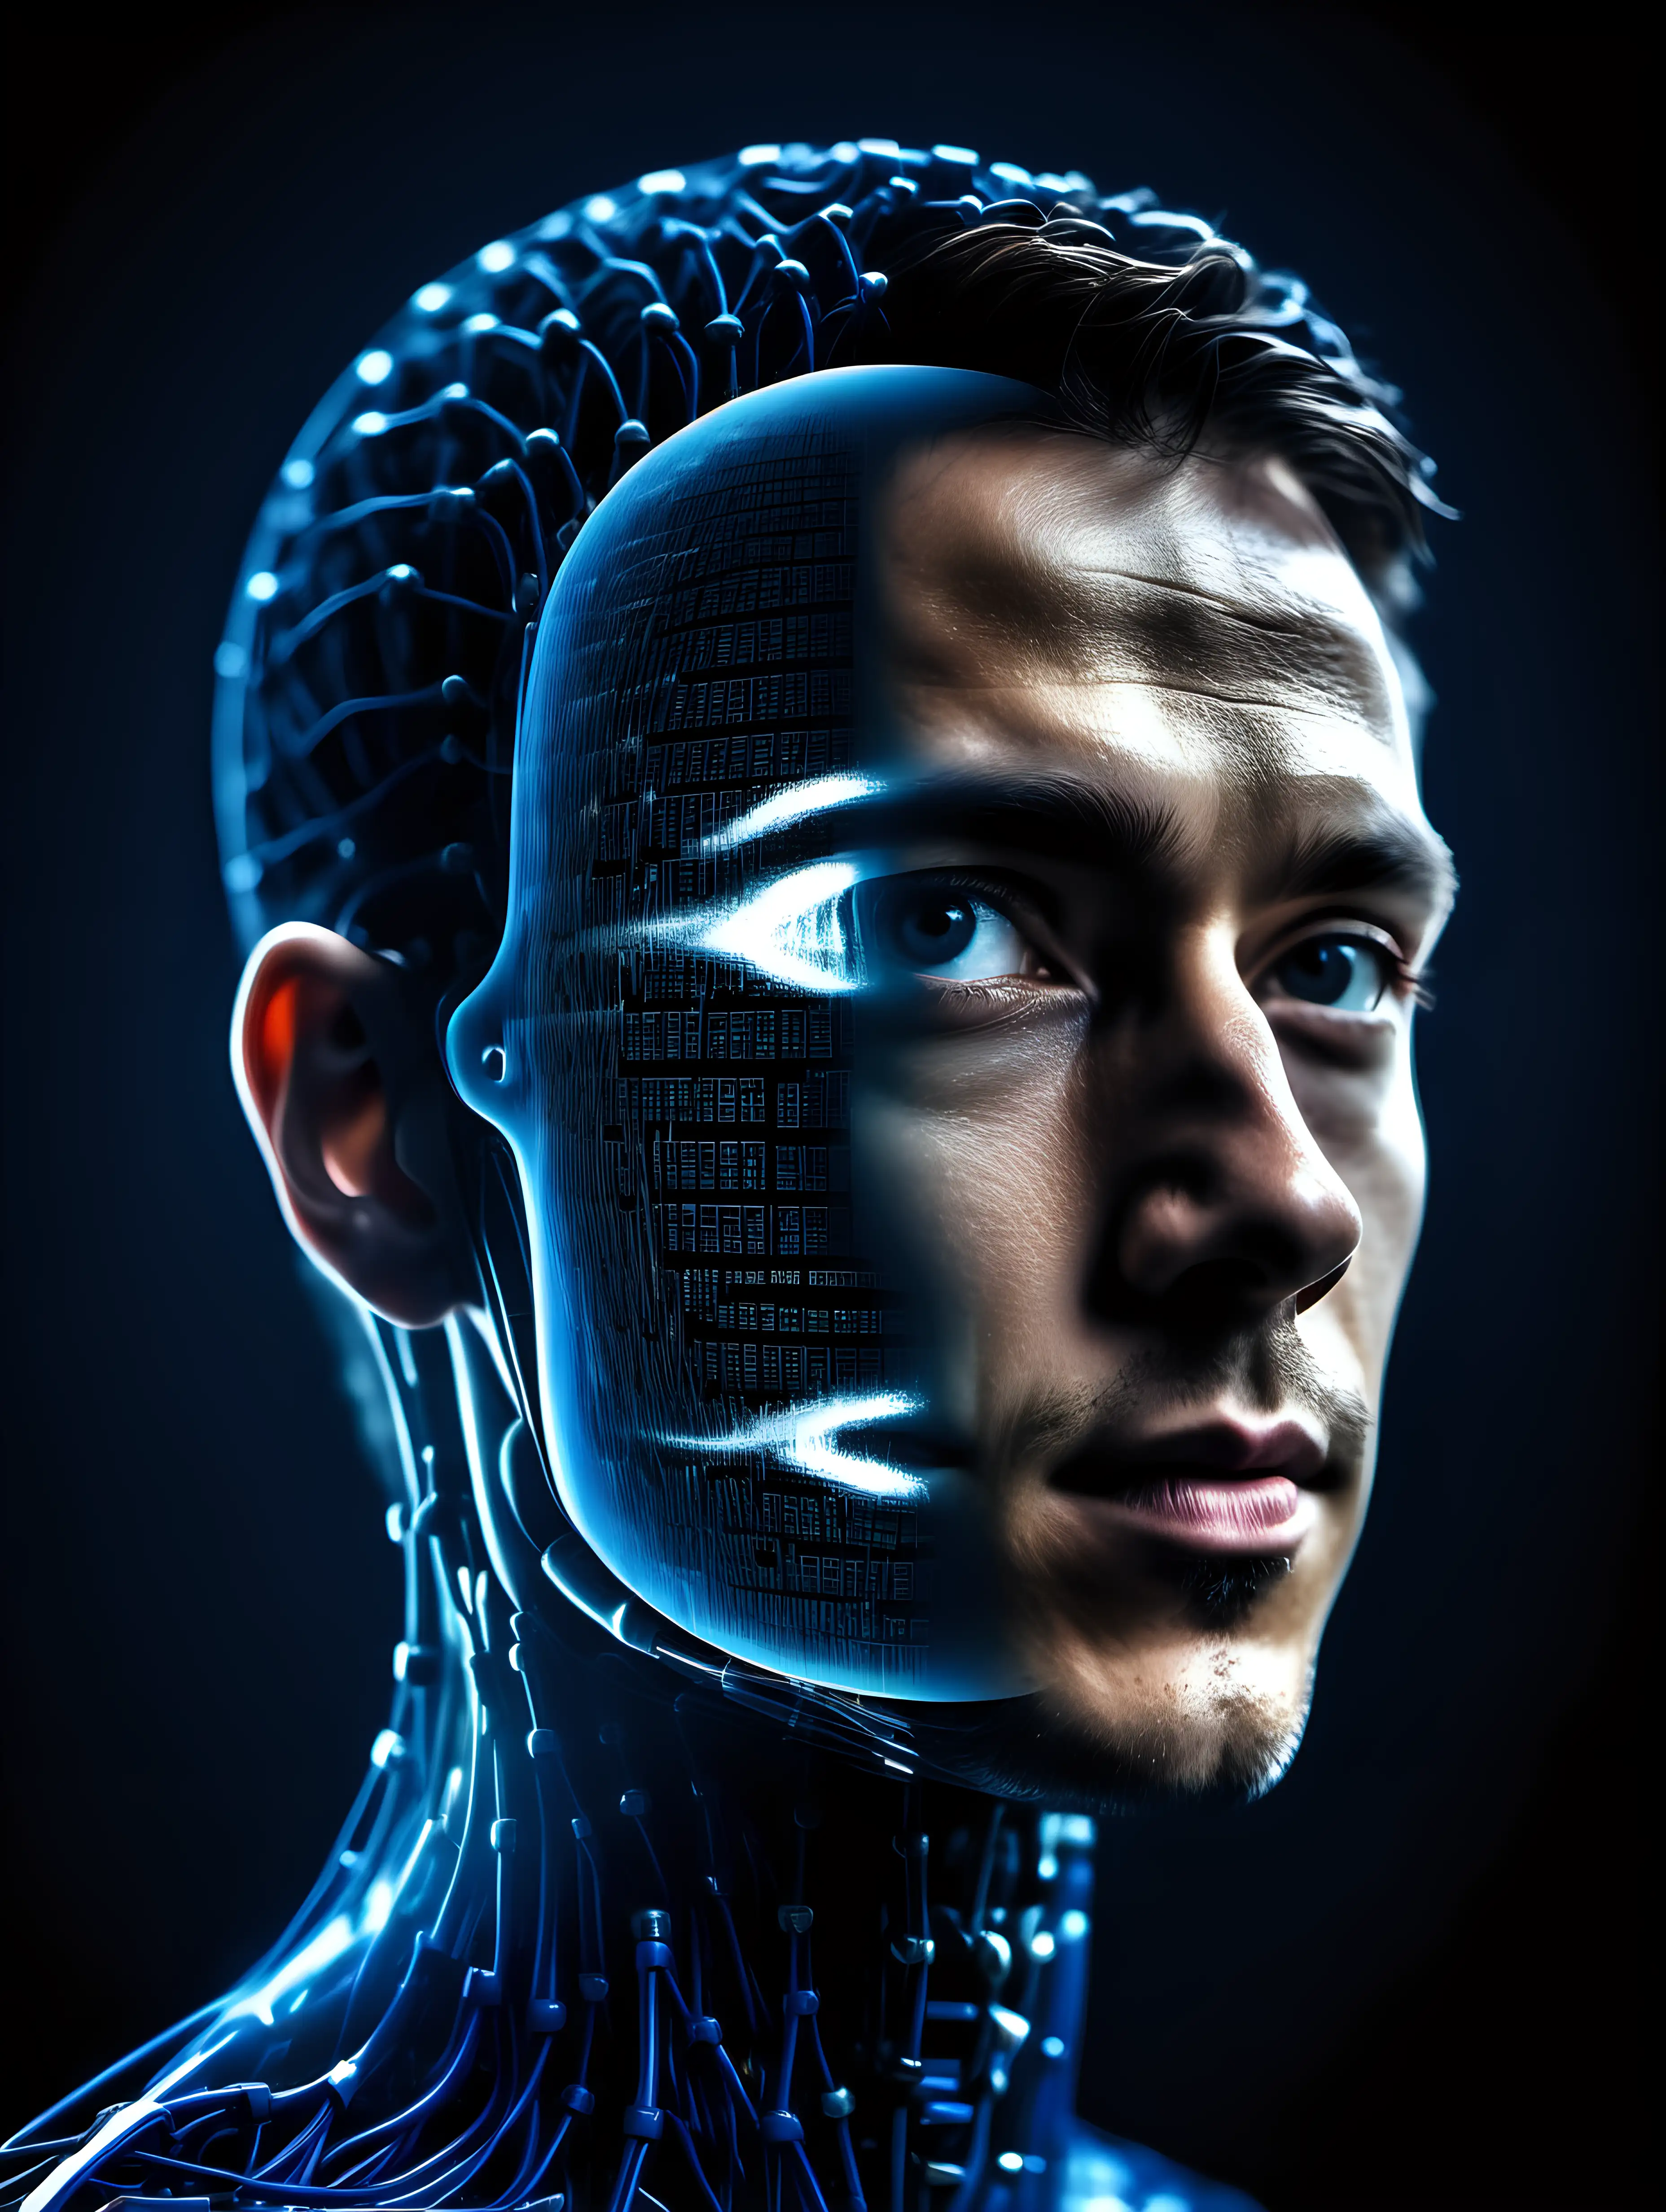 professional photo with slight reflection. dark background. dark blue high tech waves of neural network in bottom and double exposure nice man 17 years old human head half robot half human westworld style uhd 8k realistic detailed bit of matrix style 